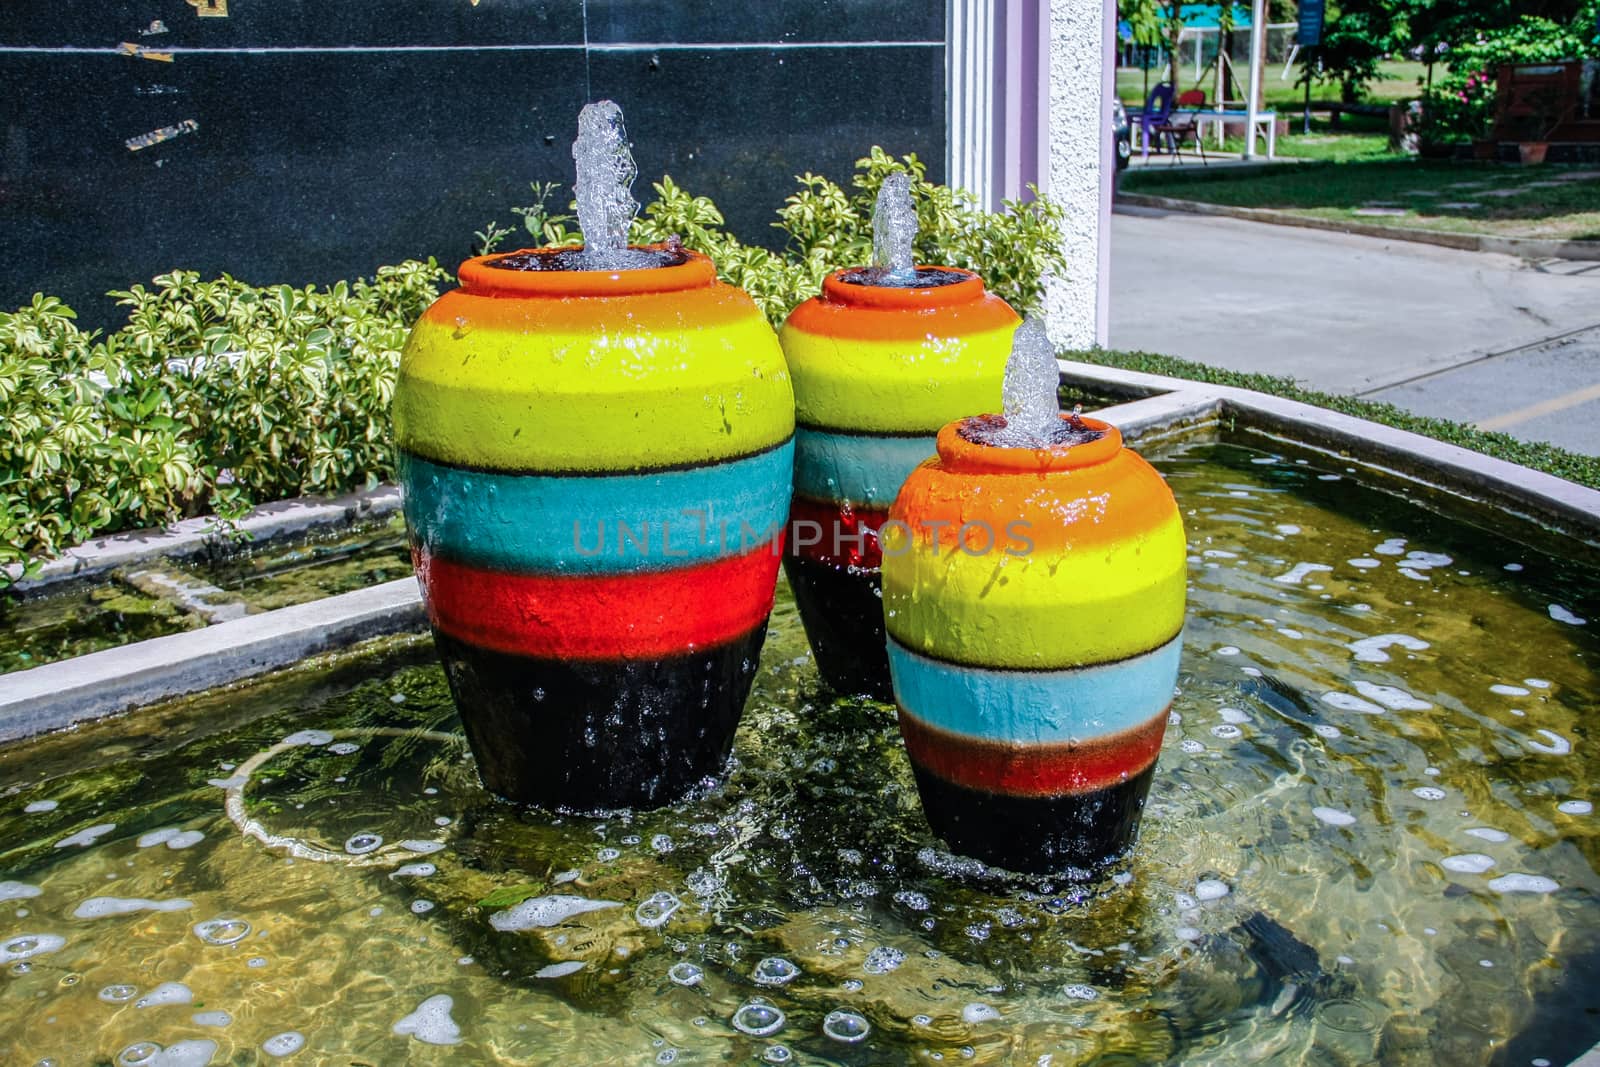 colorful jar pot fountain in pond front of entrance door